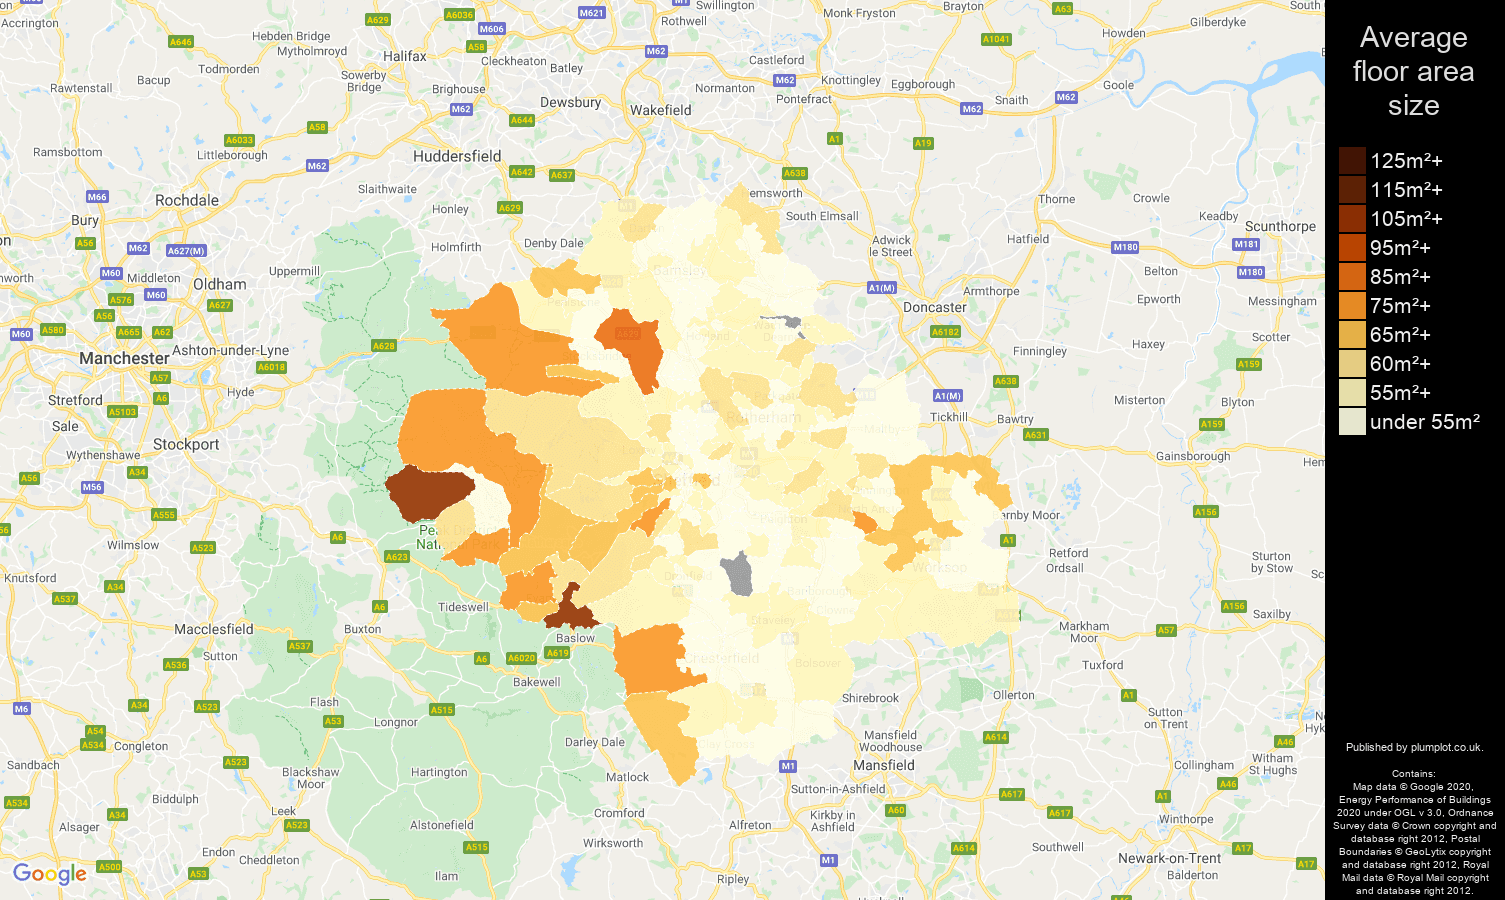 Sheffield map of average floor area size of flats